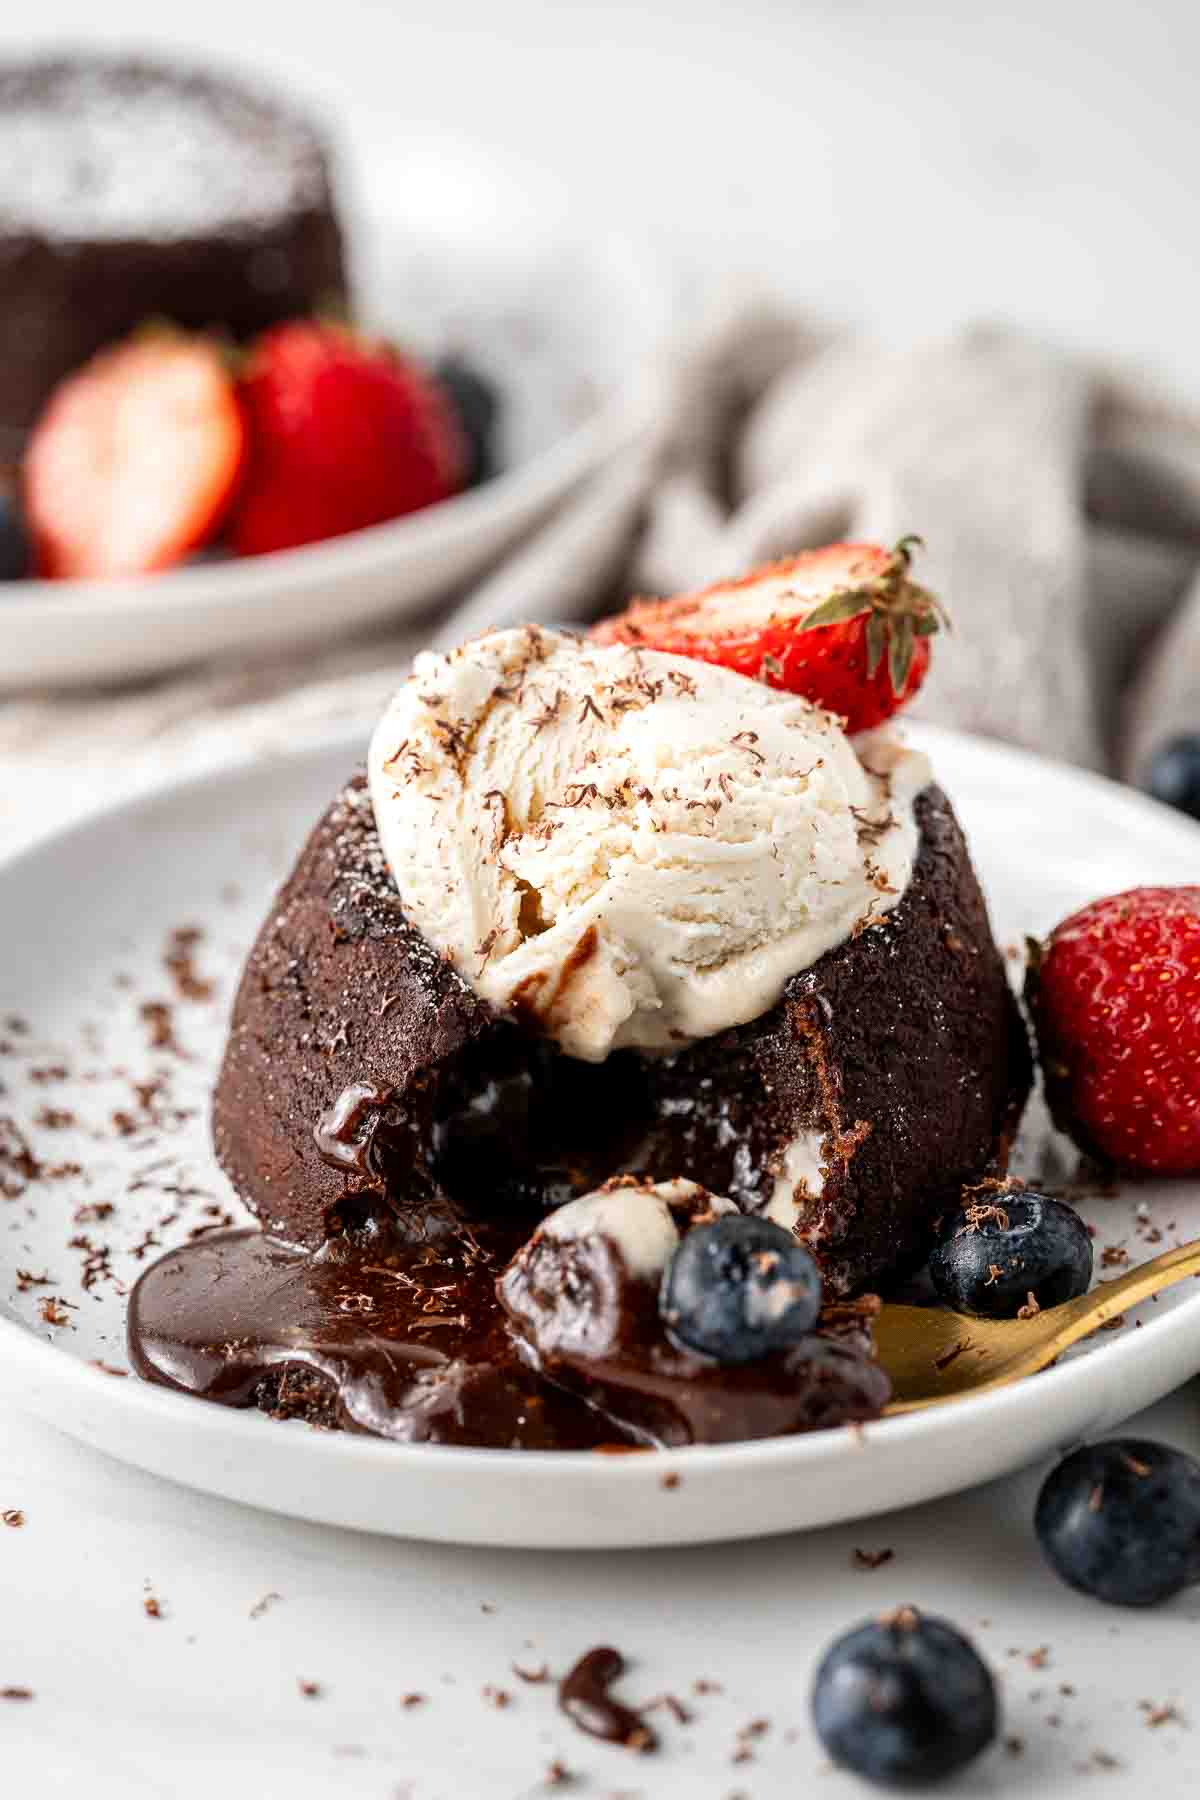 Chocolate lava cake with ice cream and berries and a gold spoon.